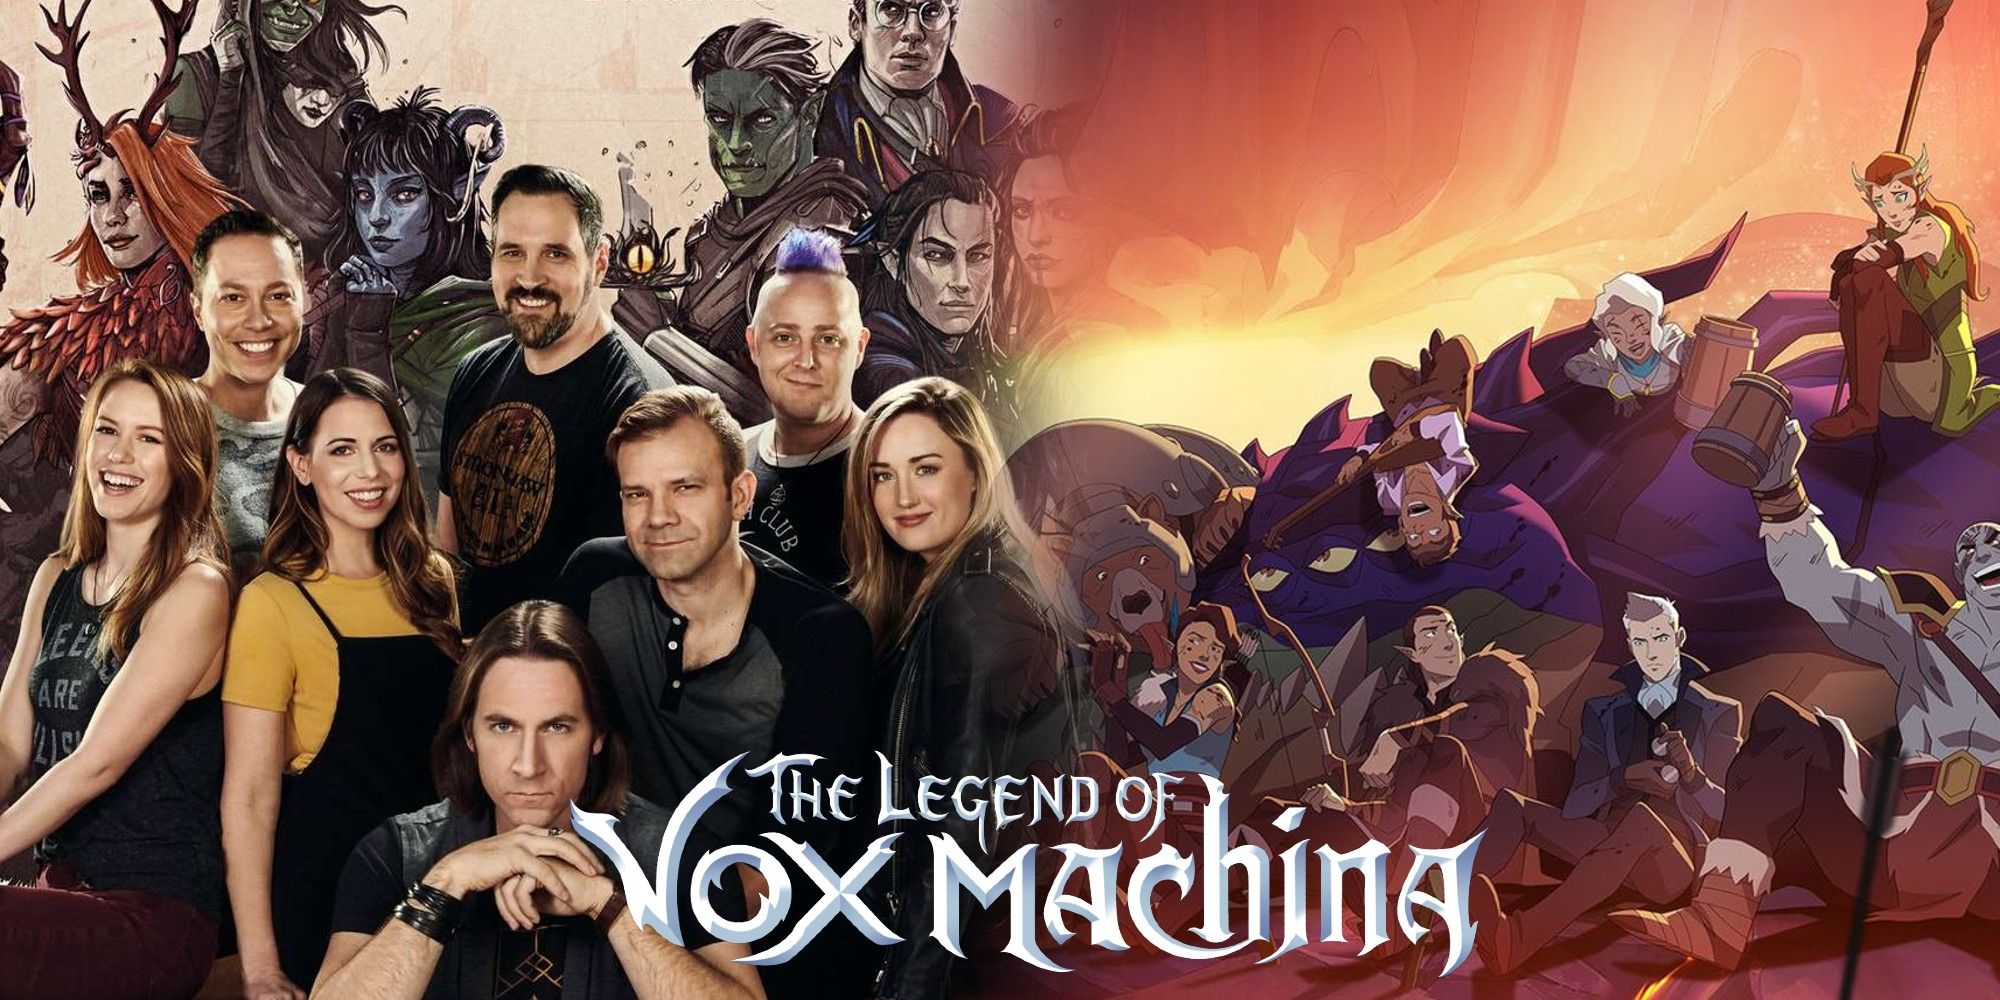 The Legend of Vox Machina is a poor substitute for the original